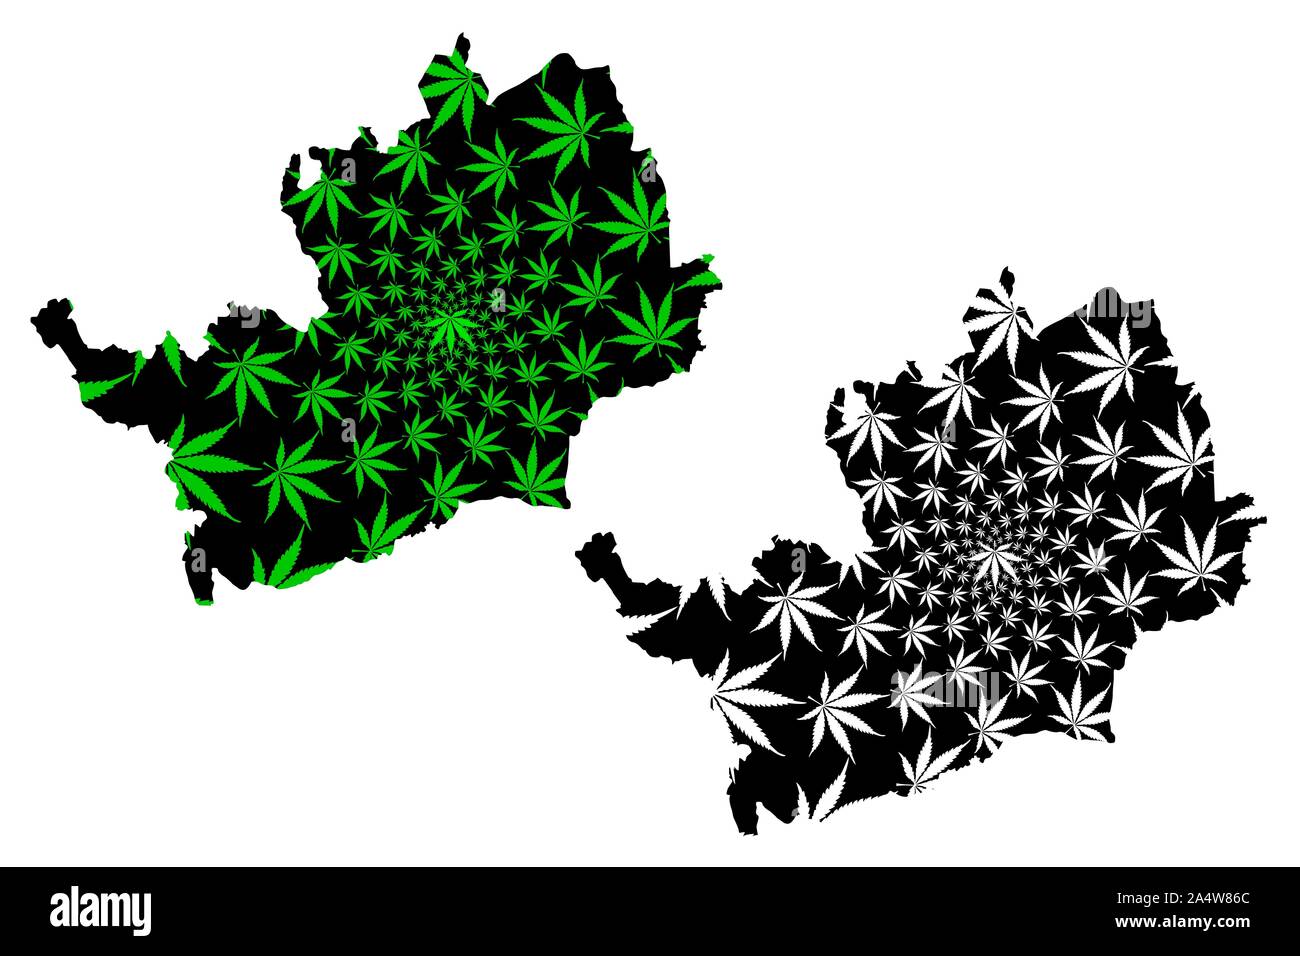 Hertfordshire (United Kingdom, England, Non-metropolitan county, shire county) map is designed cannabis leaf green and black, Hertfordshire (Herts) ma Stock Vector